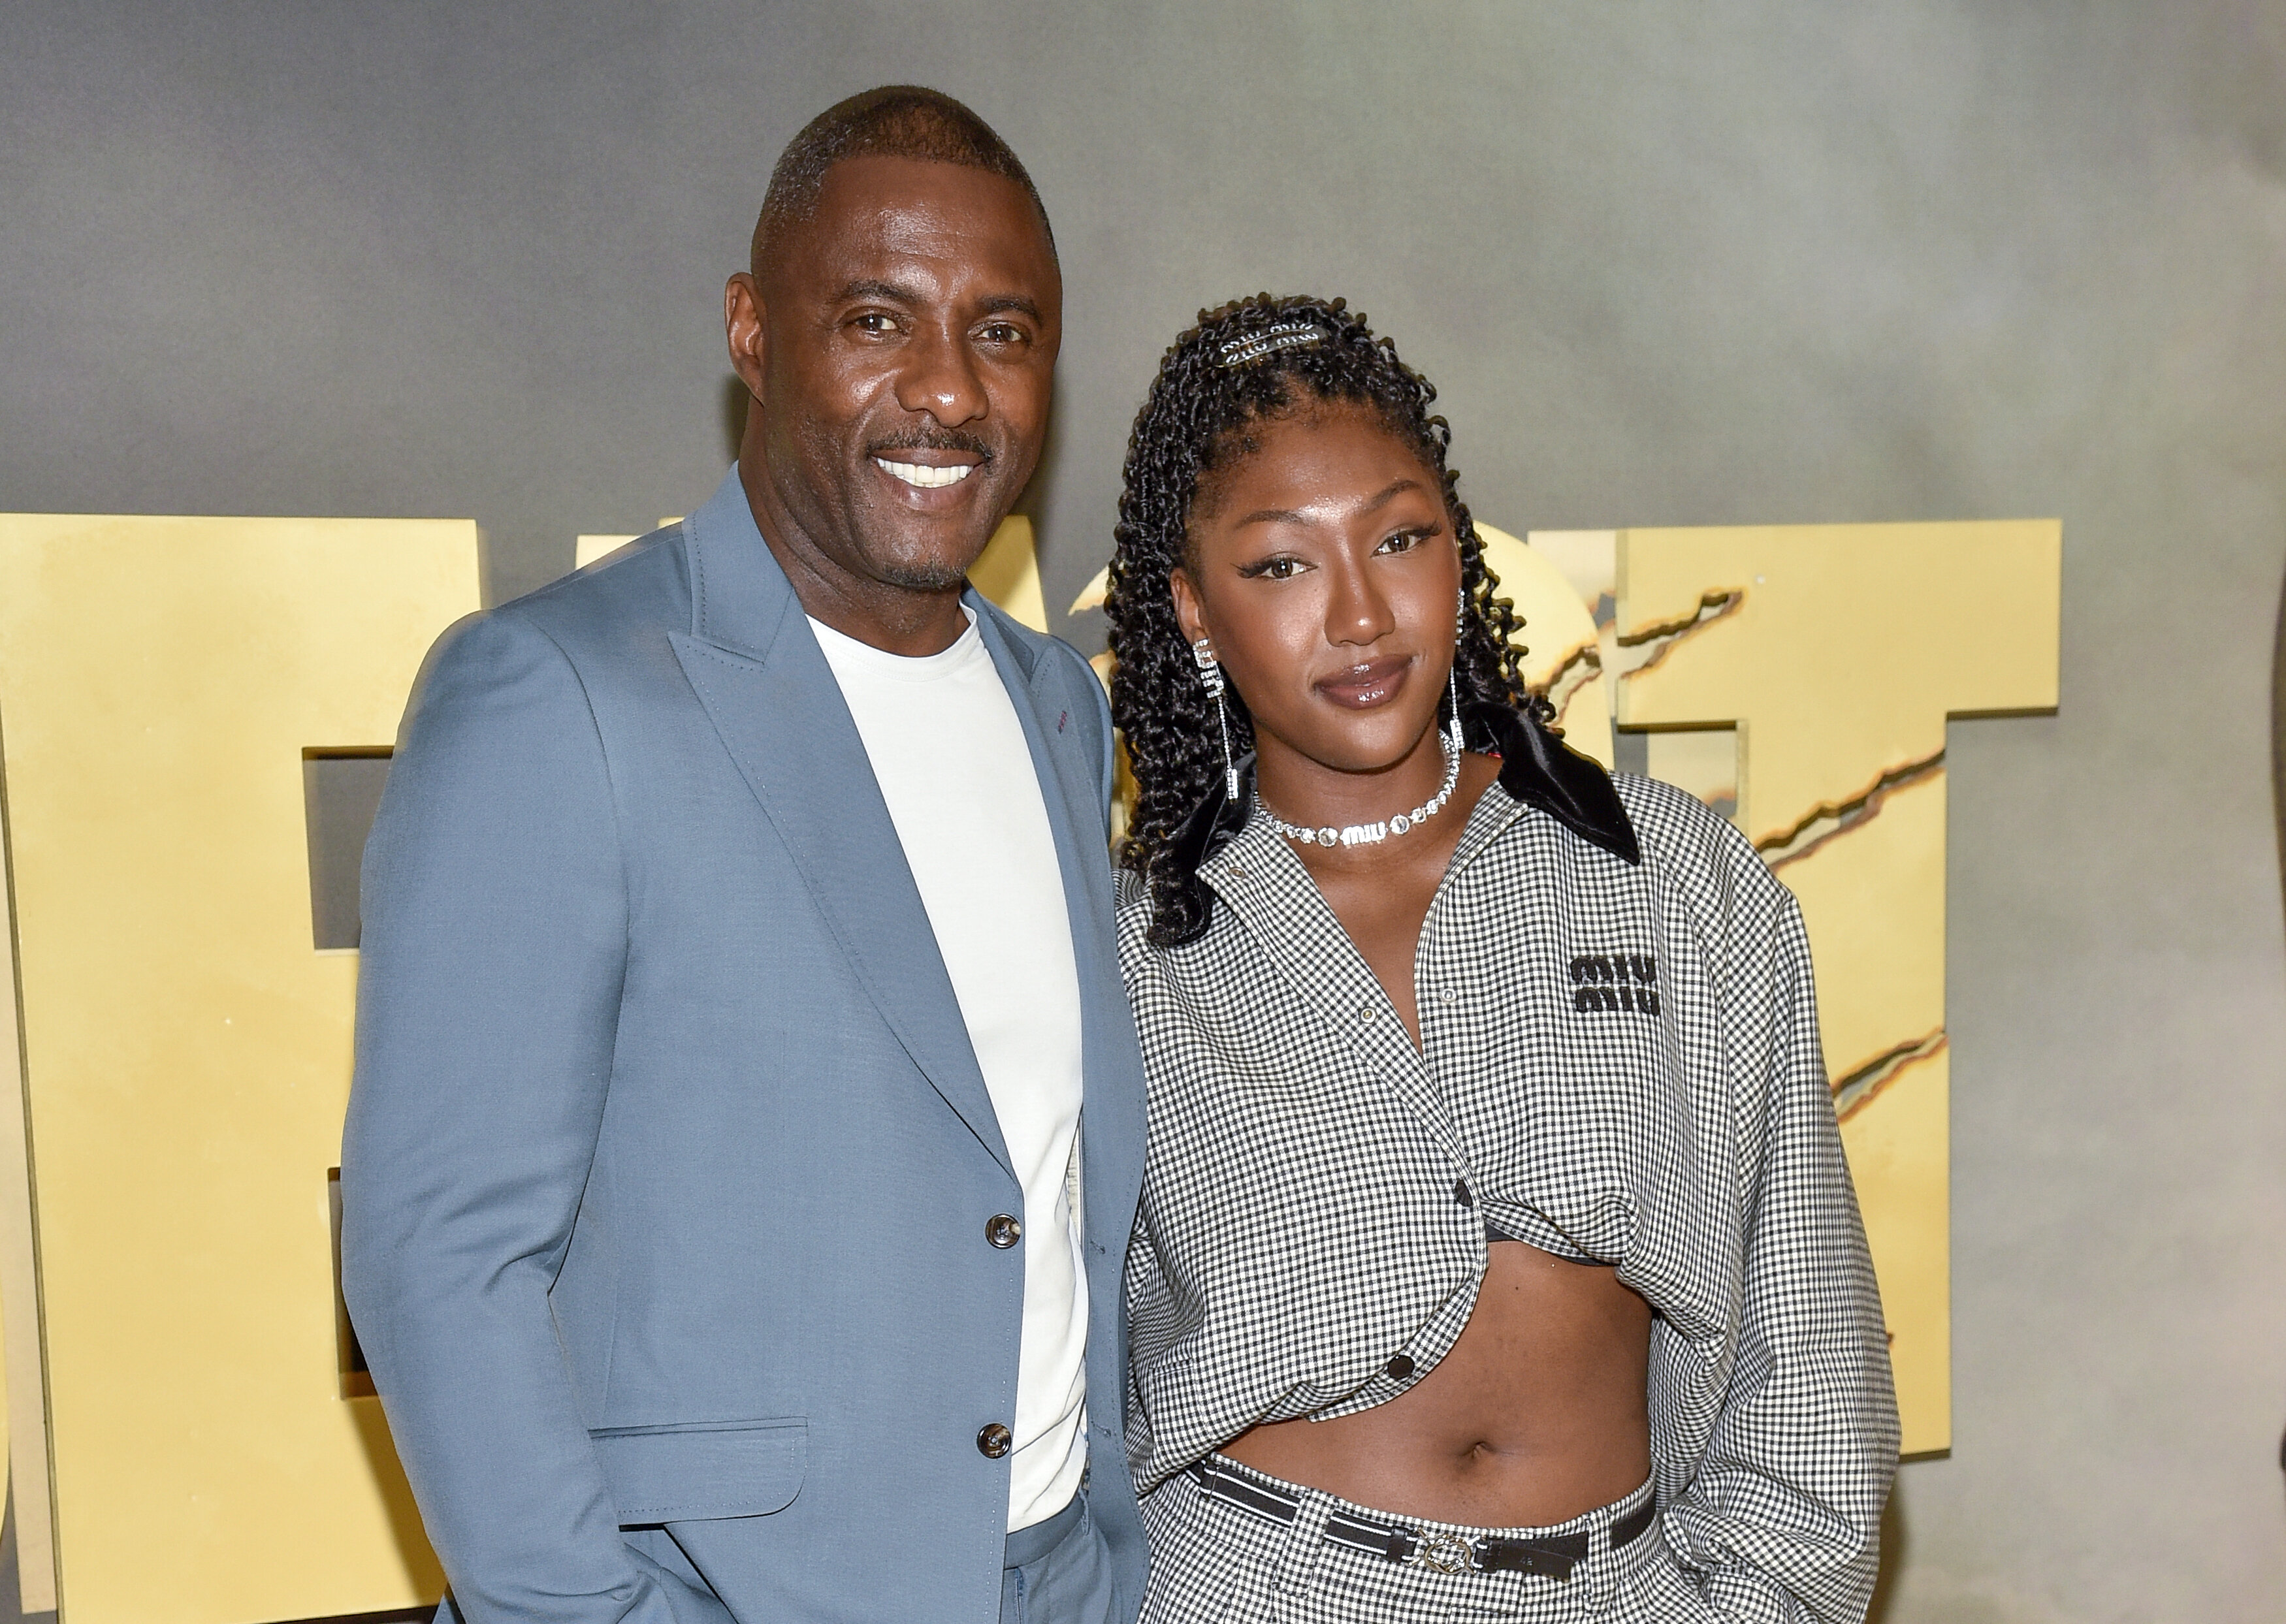 You Wont Believe Why Idris Elbas Daughter Stopped Speaking To Him For 3 Weeks HuffPost Entertainment